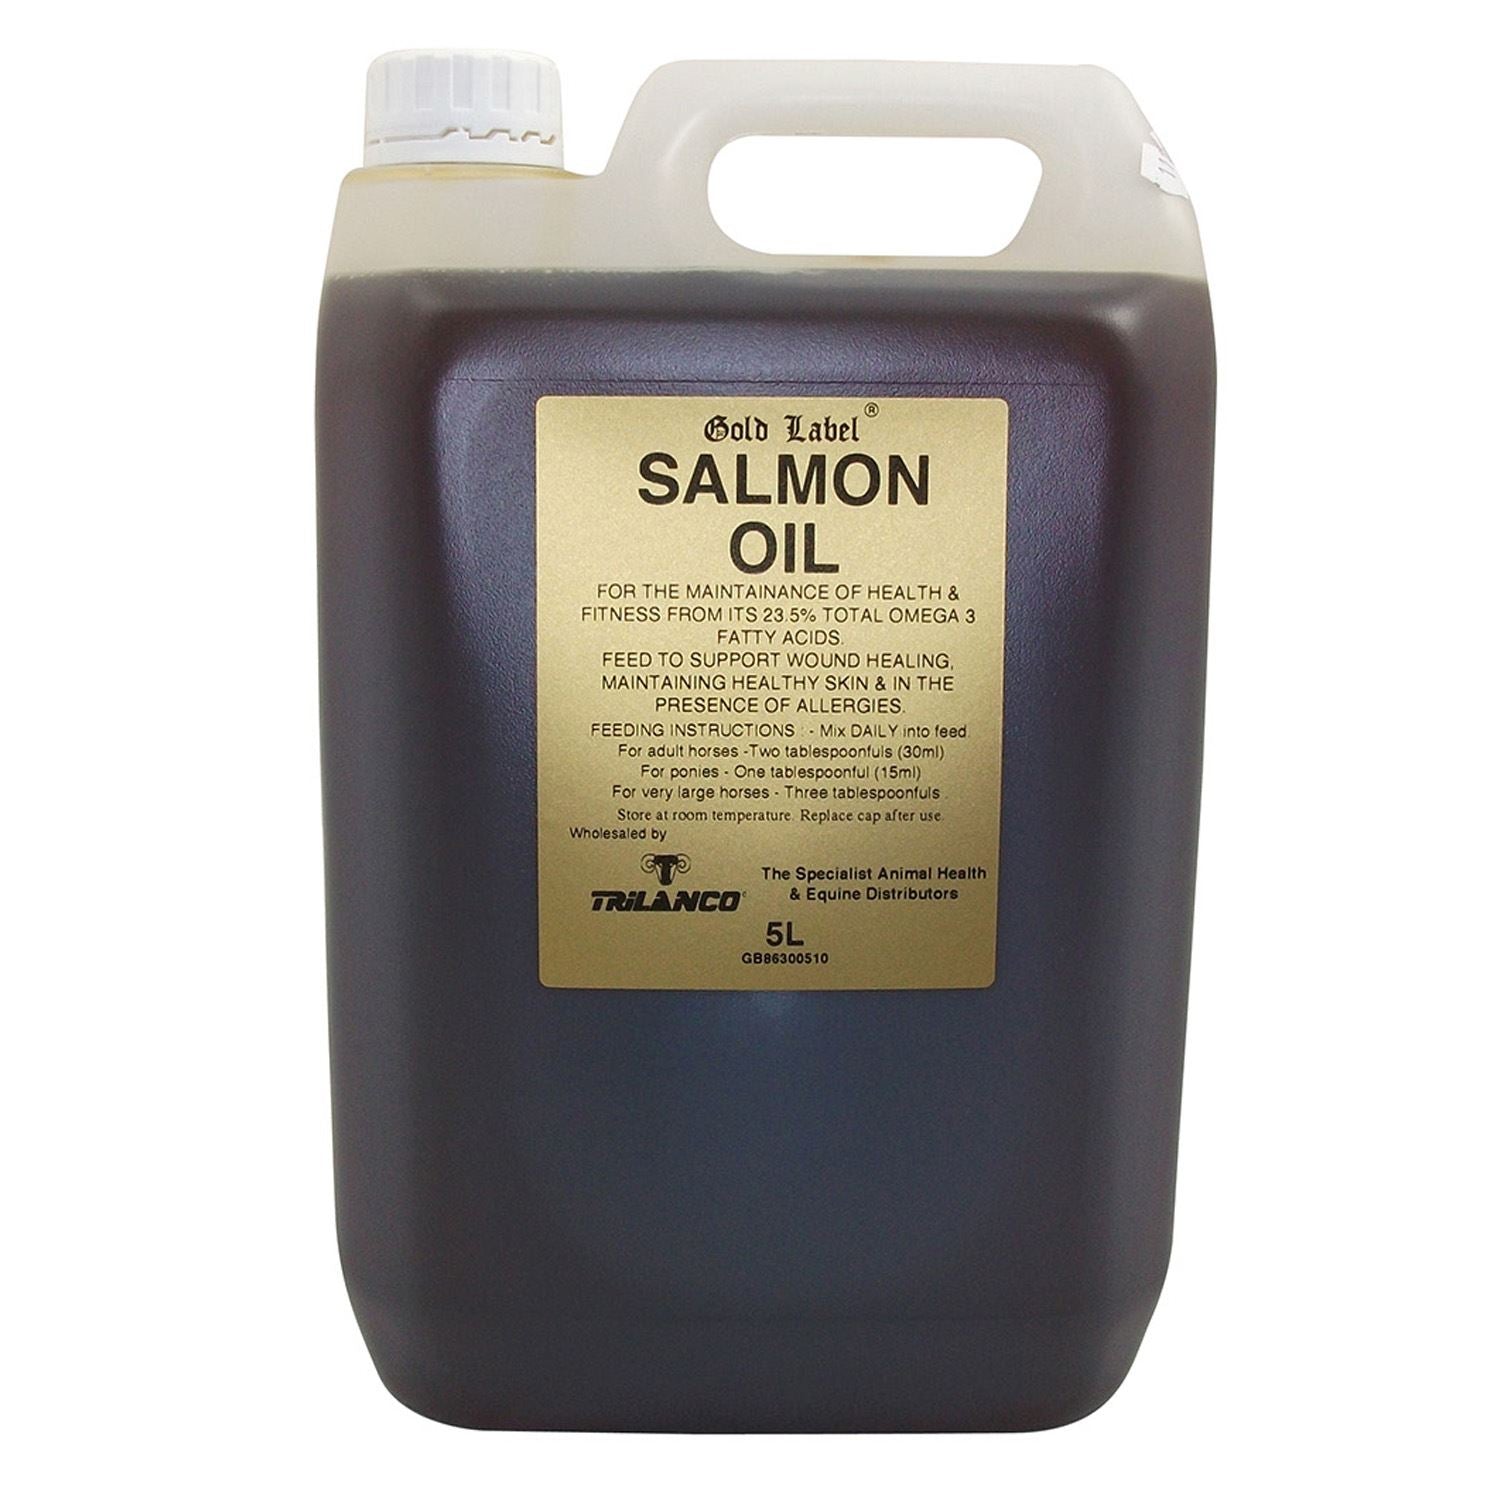 Gold Label Salmon Oil - Just Horse Riders